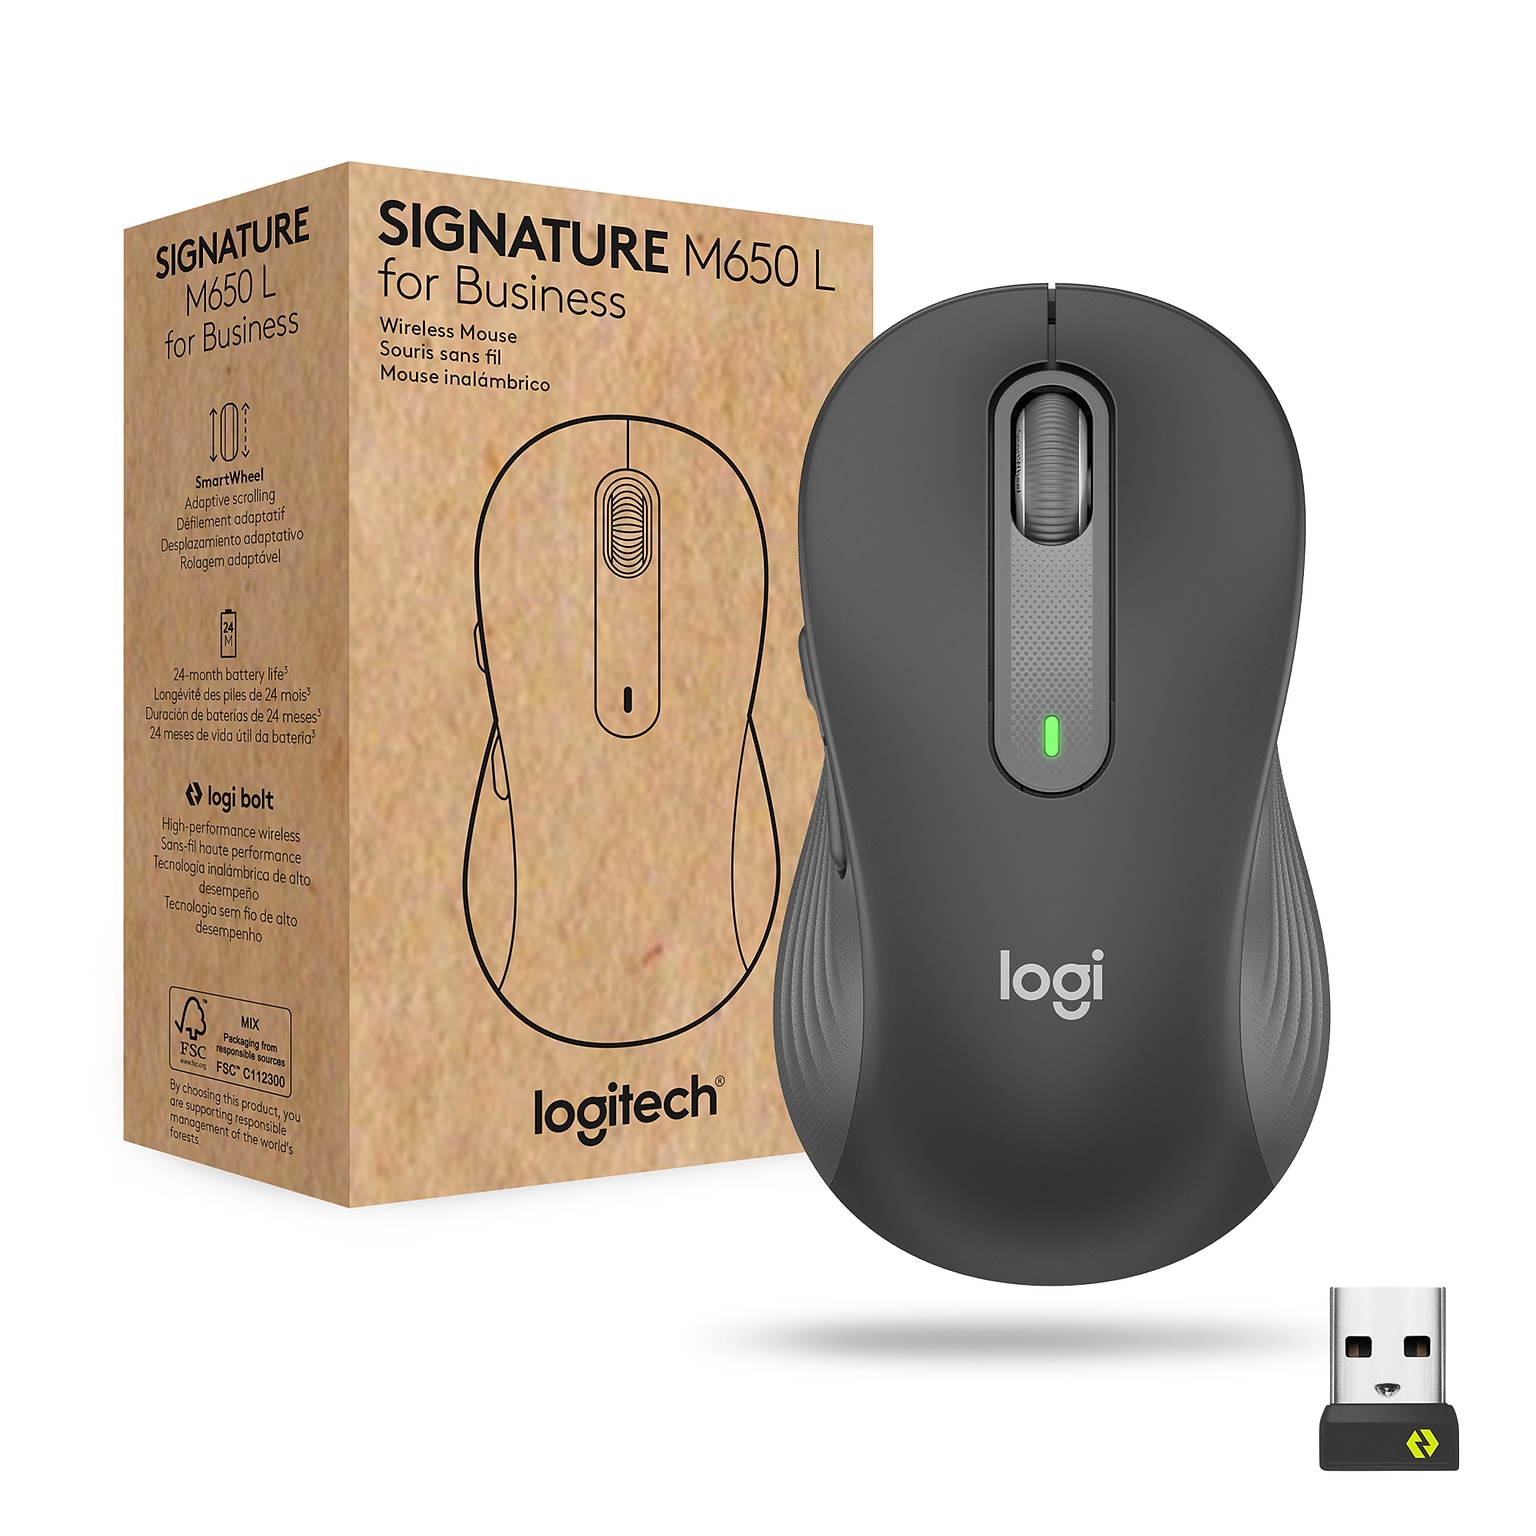 Logitech Signature M650 Large for Business Wireless Optical USB Mouse, Graphite (910-006346)